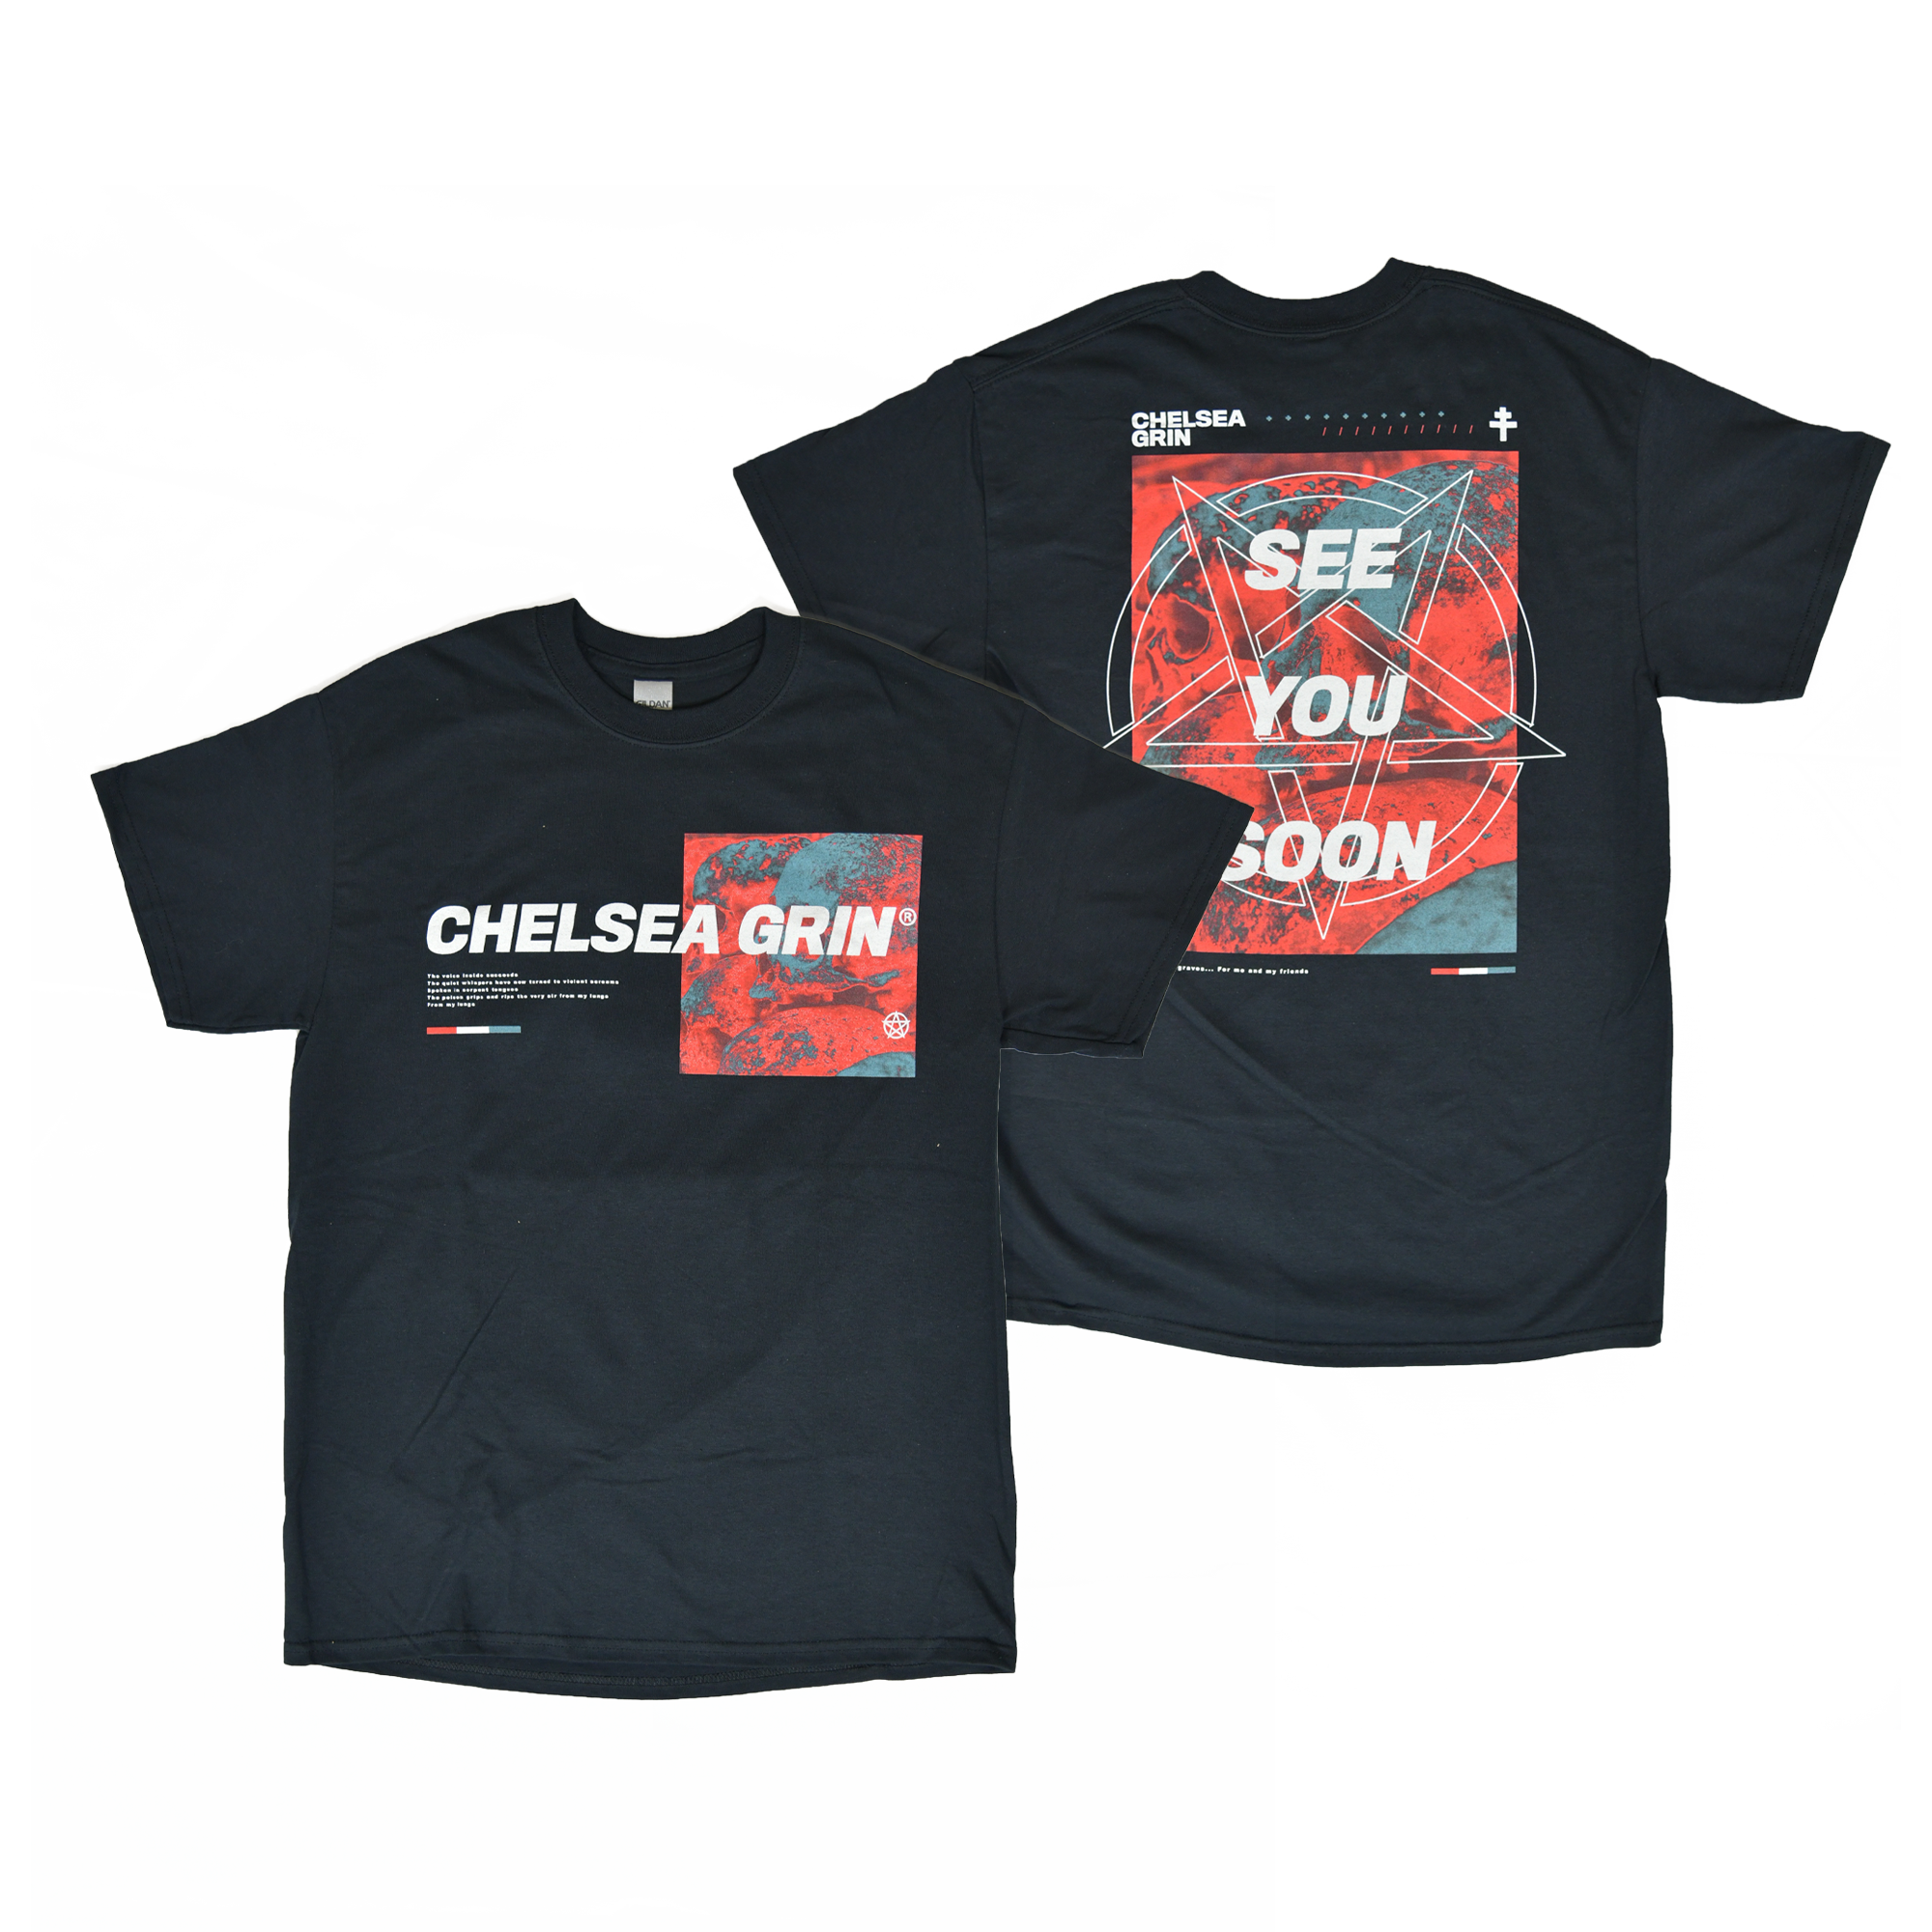 Chelsea Grin - See You Soon Shirt